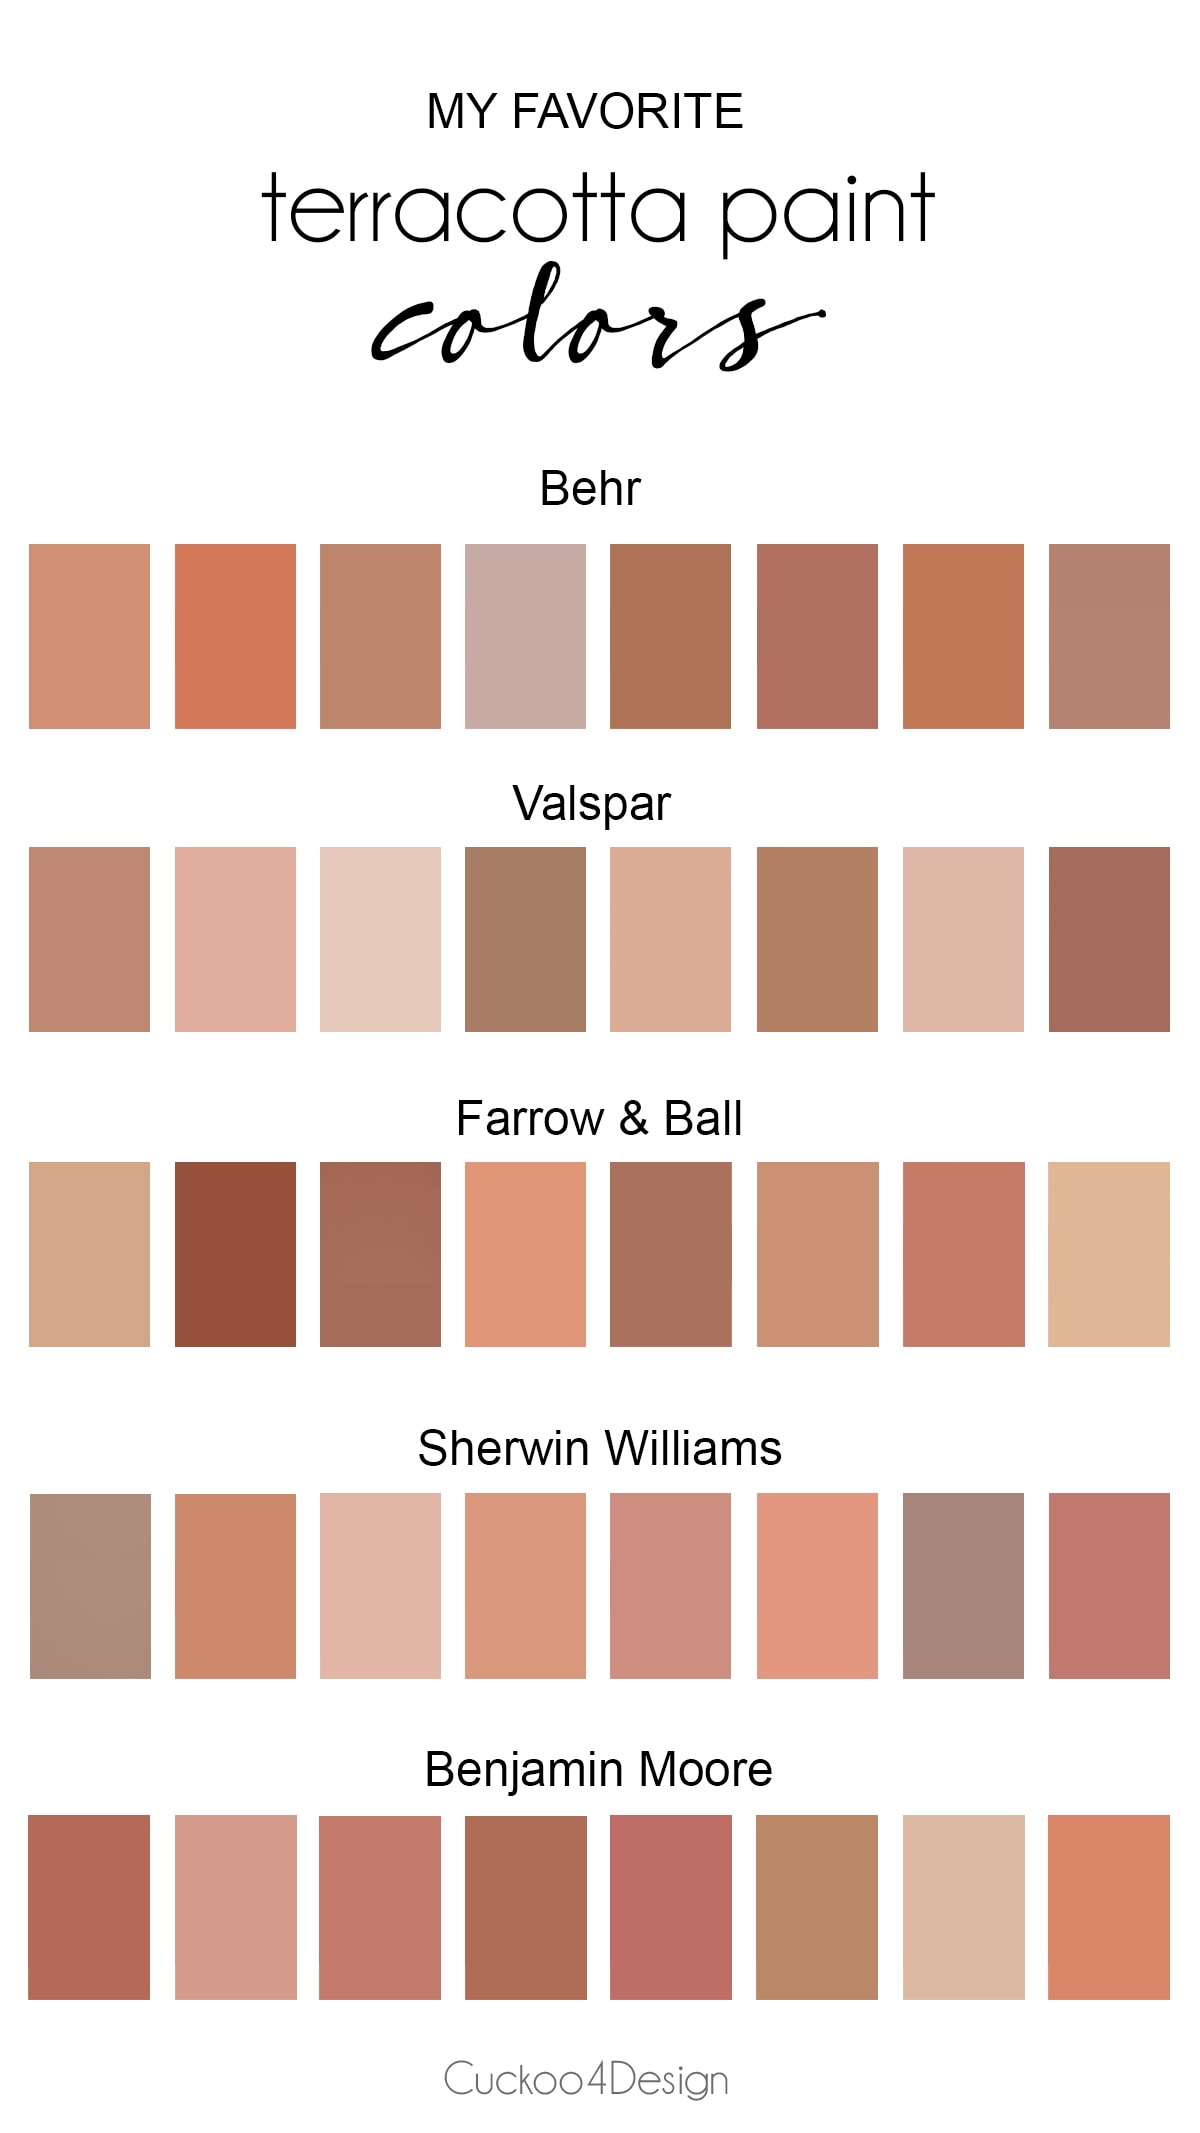 my favorite terracotta paint colors from different brands